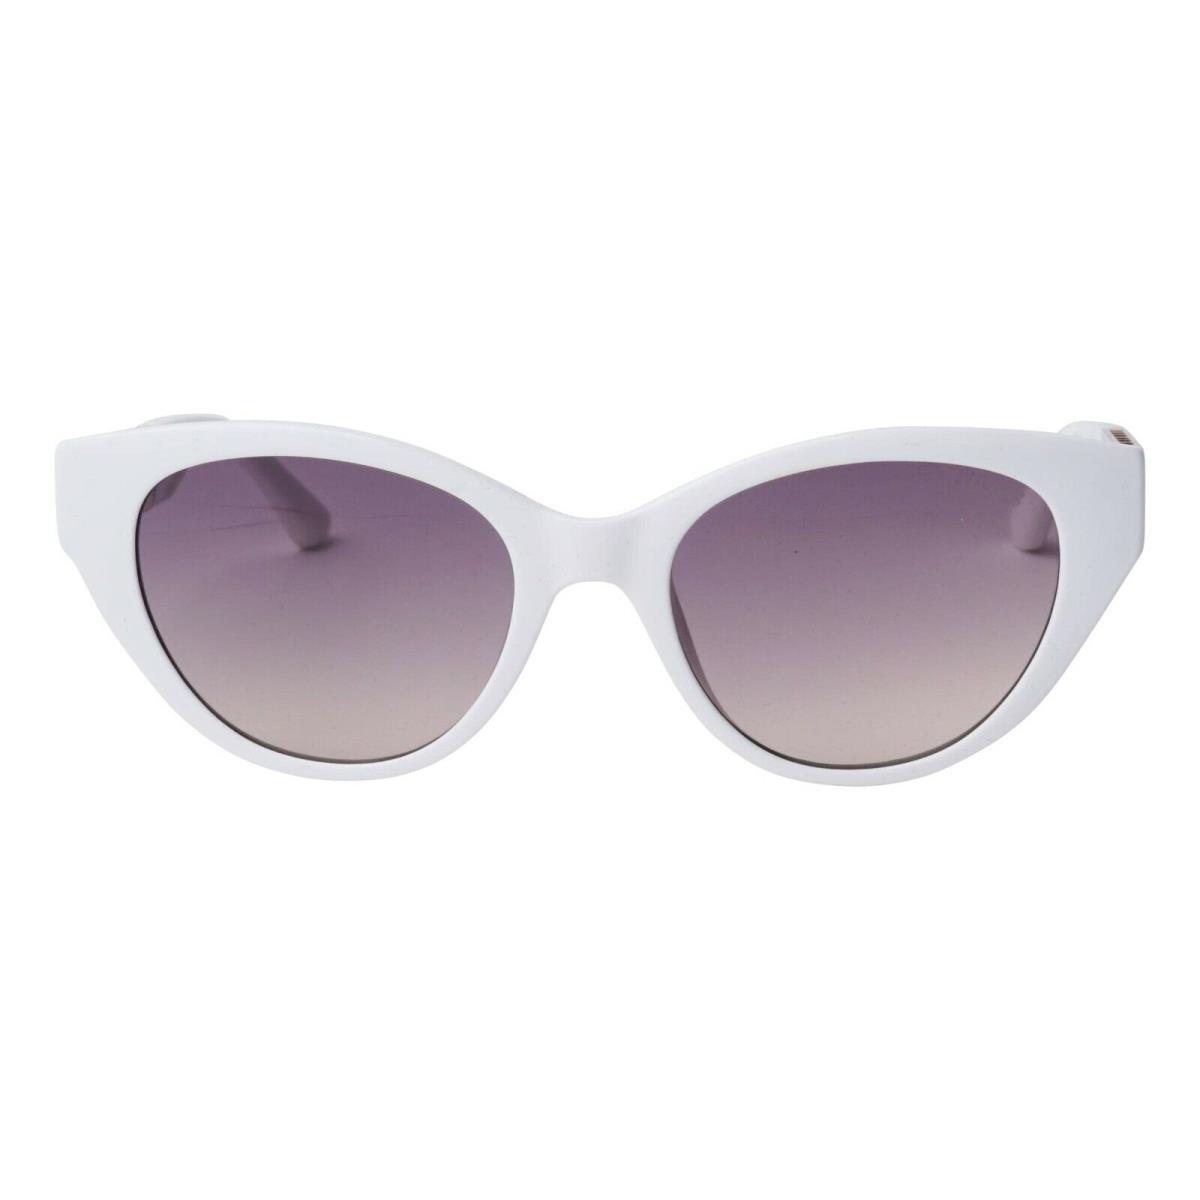 Guess sunglasses  - White , White Frame, Gradient Brown Lens